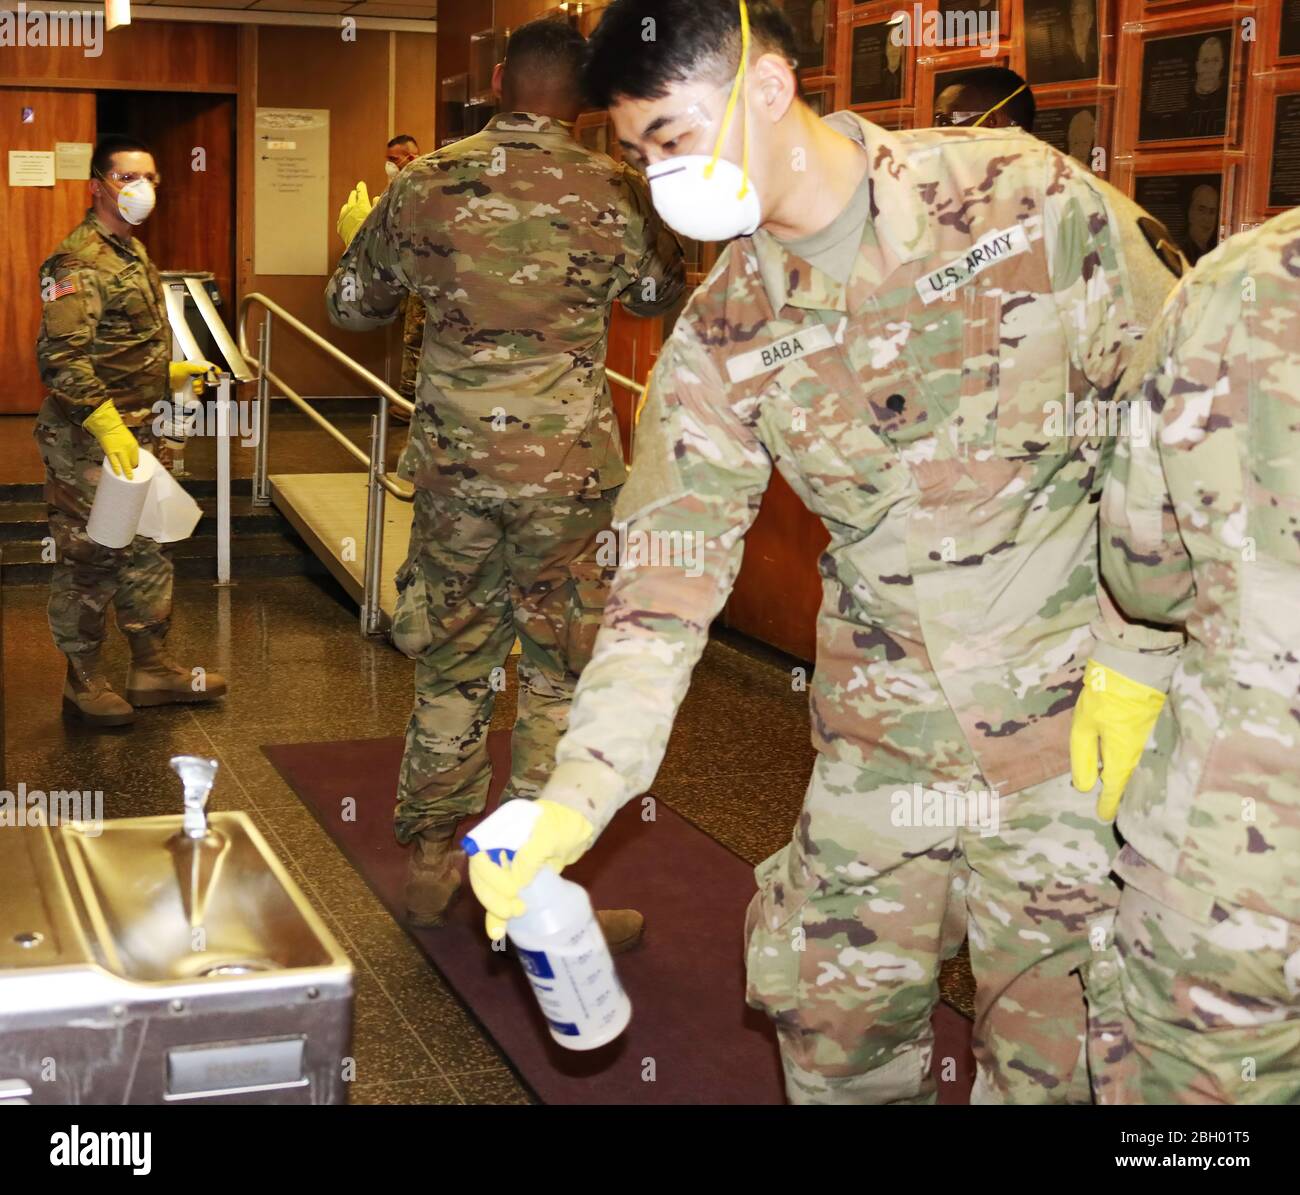 New York Army National Guard Spec. Hideyuki Baba, a member of the 187th Signal Company, sprays a drinking fountain in New Rochelle City Hall on Saturday, March 14 while he and other Soldiers cleaned the building's surface areas as part of the state's efforts to contain the spread of the COVID-19 coronavirus in the city. The National Guard has deployed Soldiers and Airmen to Westchester county to assist state and local officials with efforts to control the virus. Cleaning public spaces is one of the Guard missions. ( Courtesy City of New Rochelle) Stock Photo